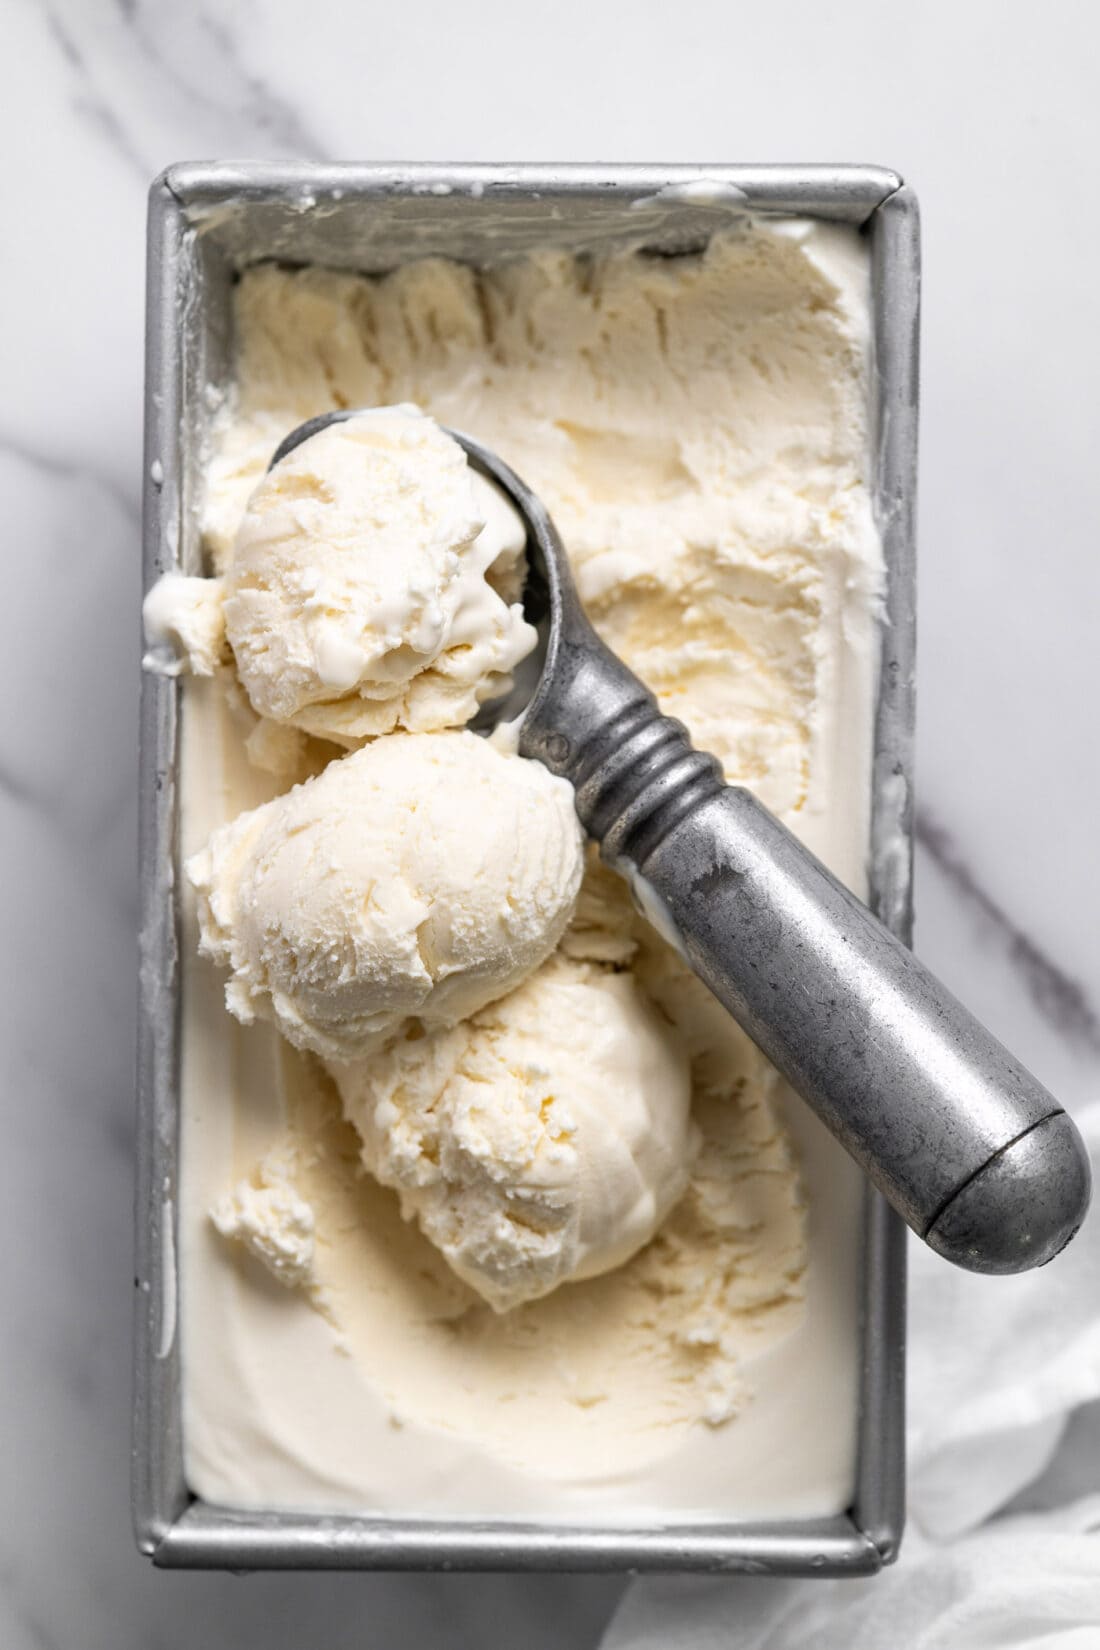 3 scoops of No Churn Ice Cream in a pan